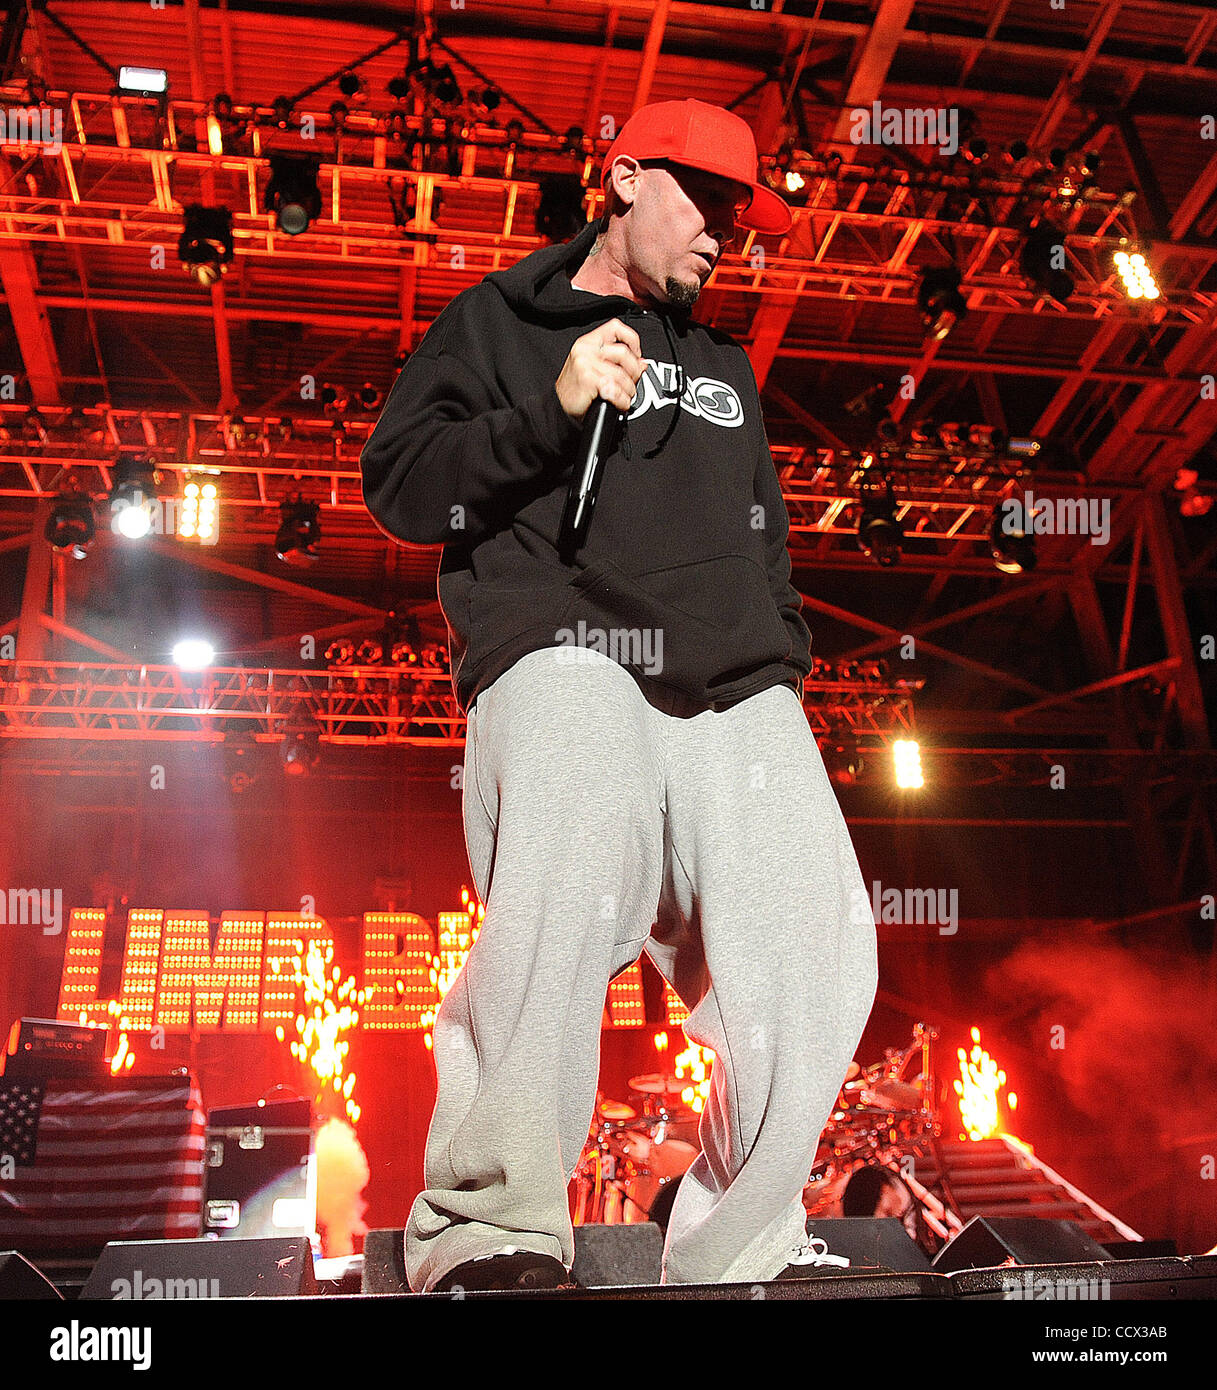 All 96+ Images which vocalist fronted the band limp bizkit? Updated